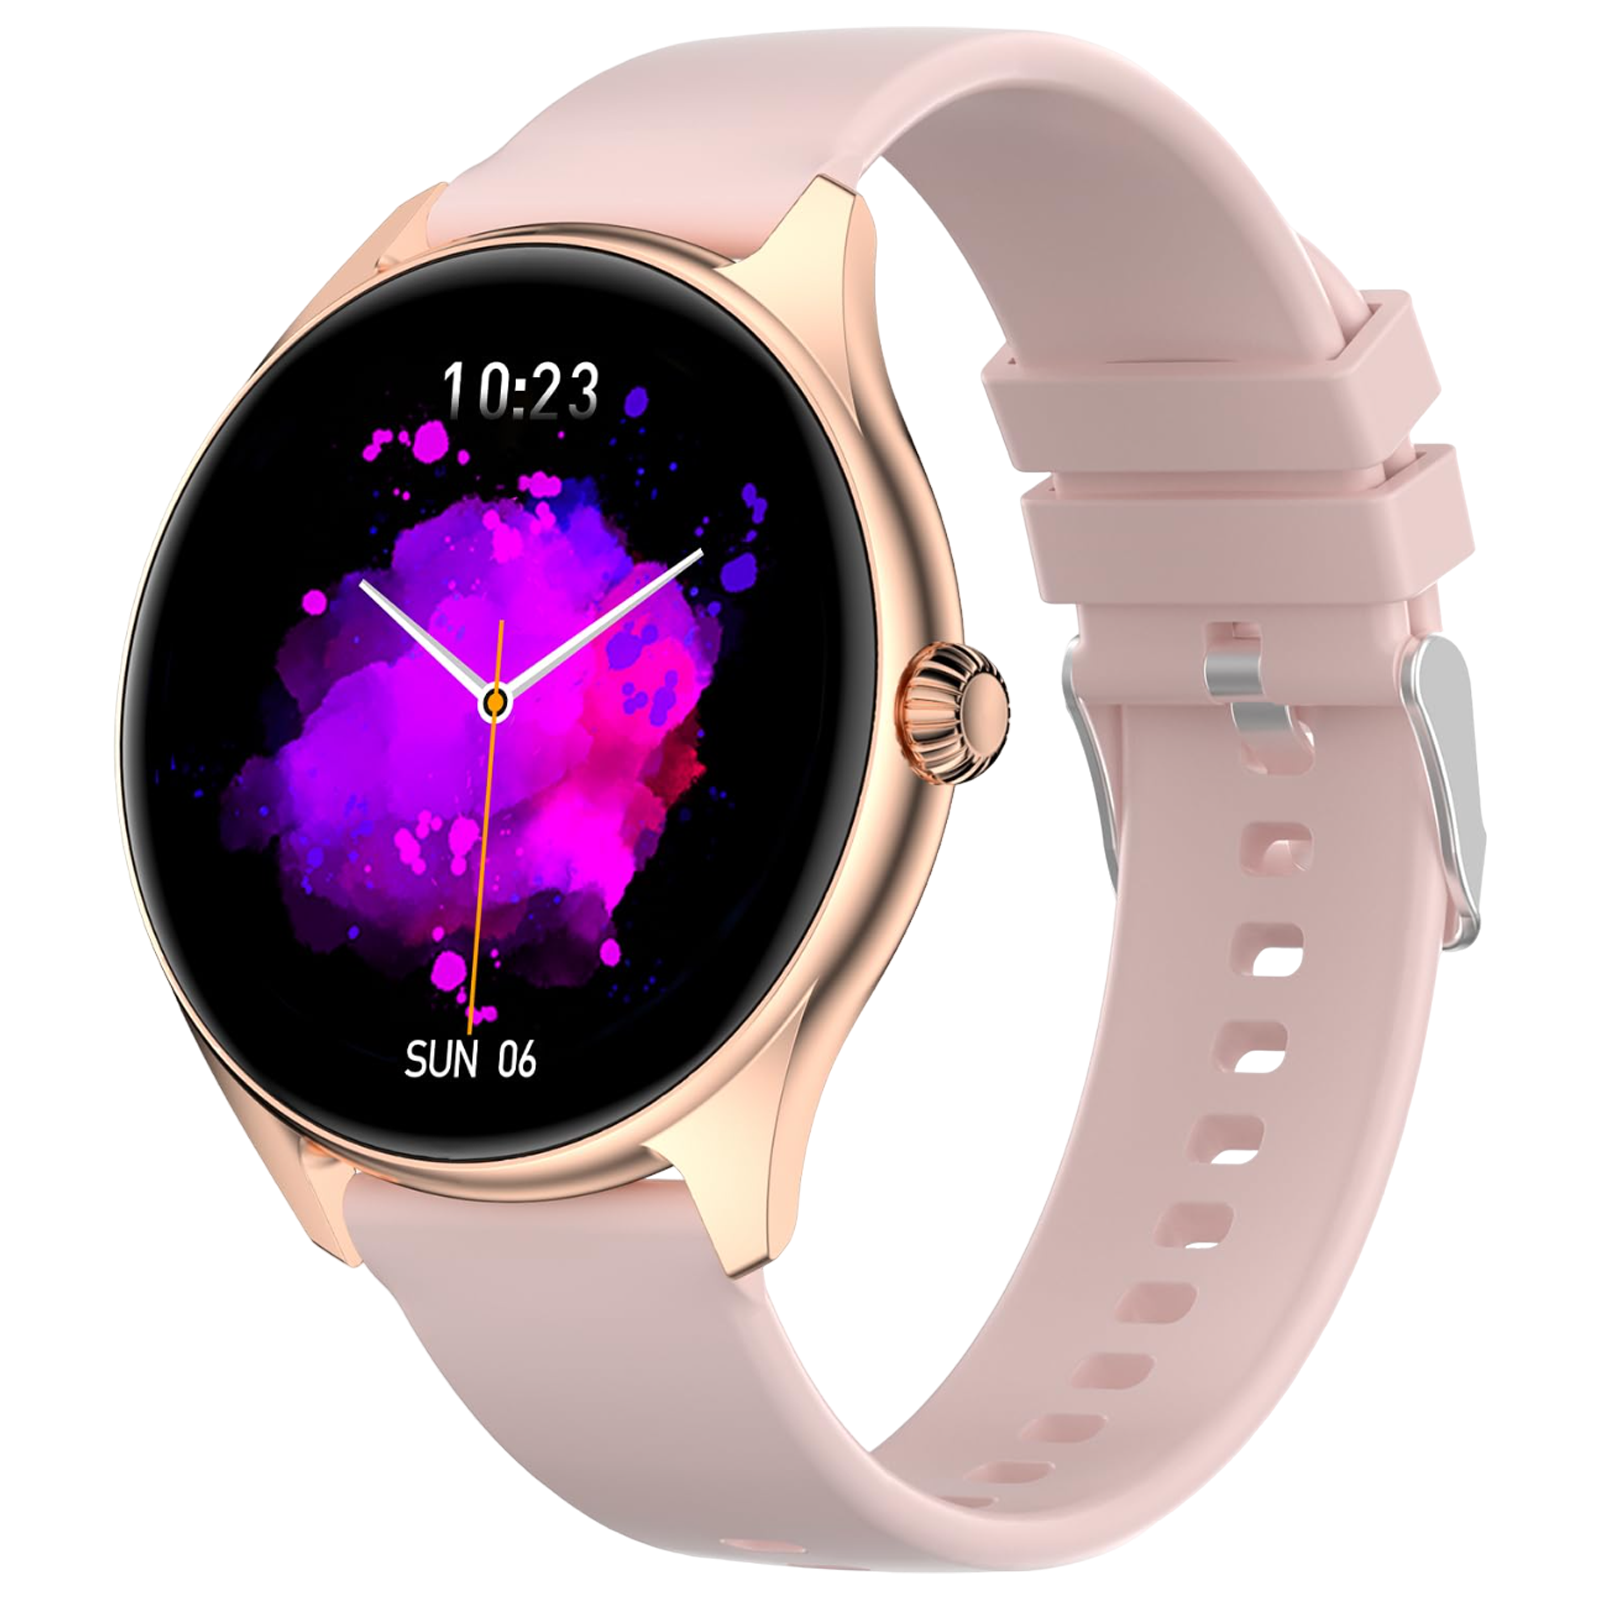 

FIRE-BOLTT Phoenix Smartwatch with Bluetooth Calling (36.3mm AMOLED Display, IP67 Water Resistant, Gold Strap)